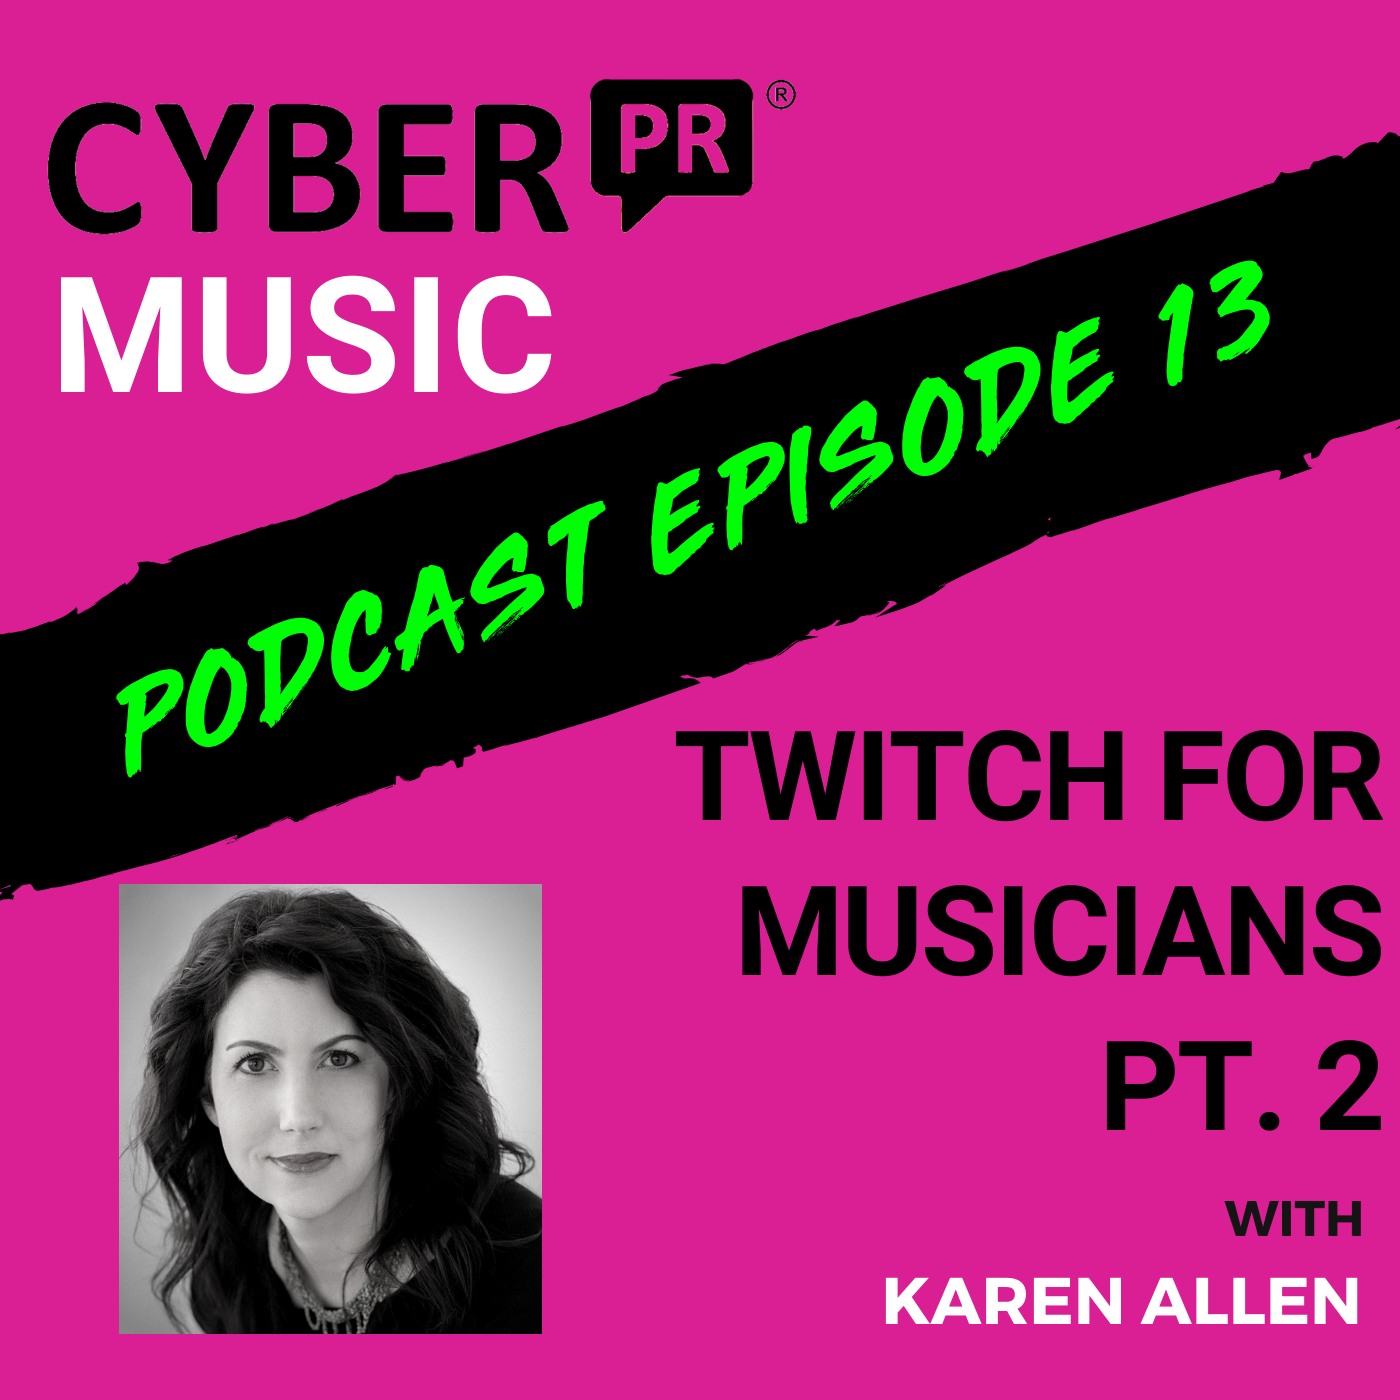 The Cyber PR Music Podcast EP 13: Twitch for Musicians Pt. 2 with Karen Allen